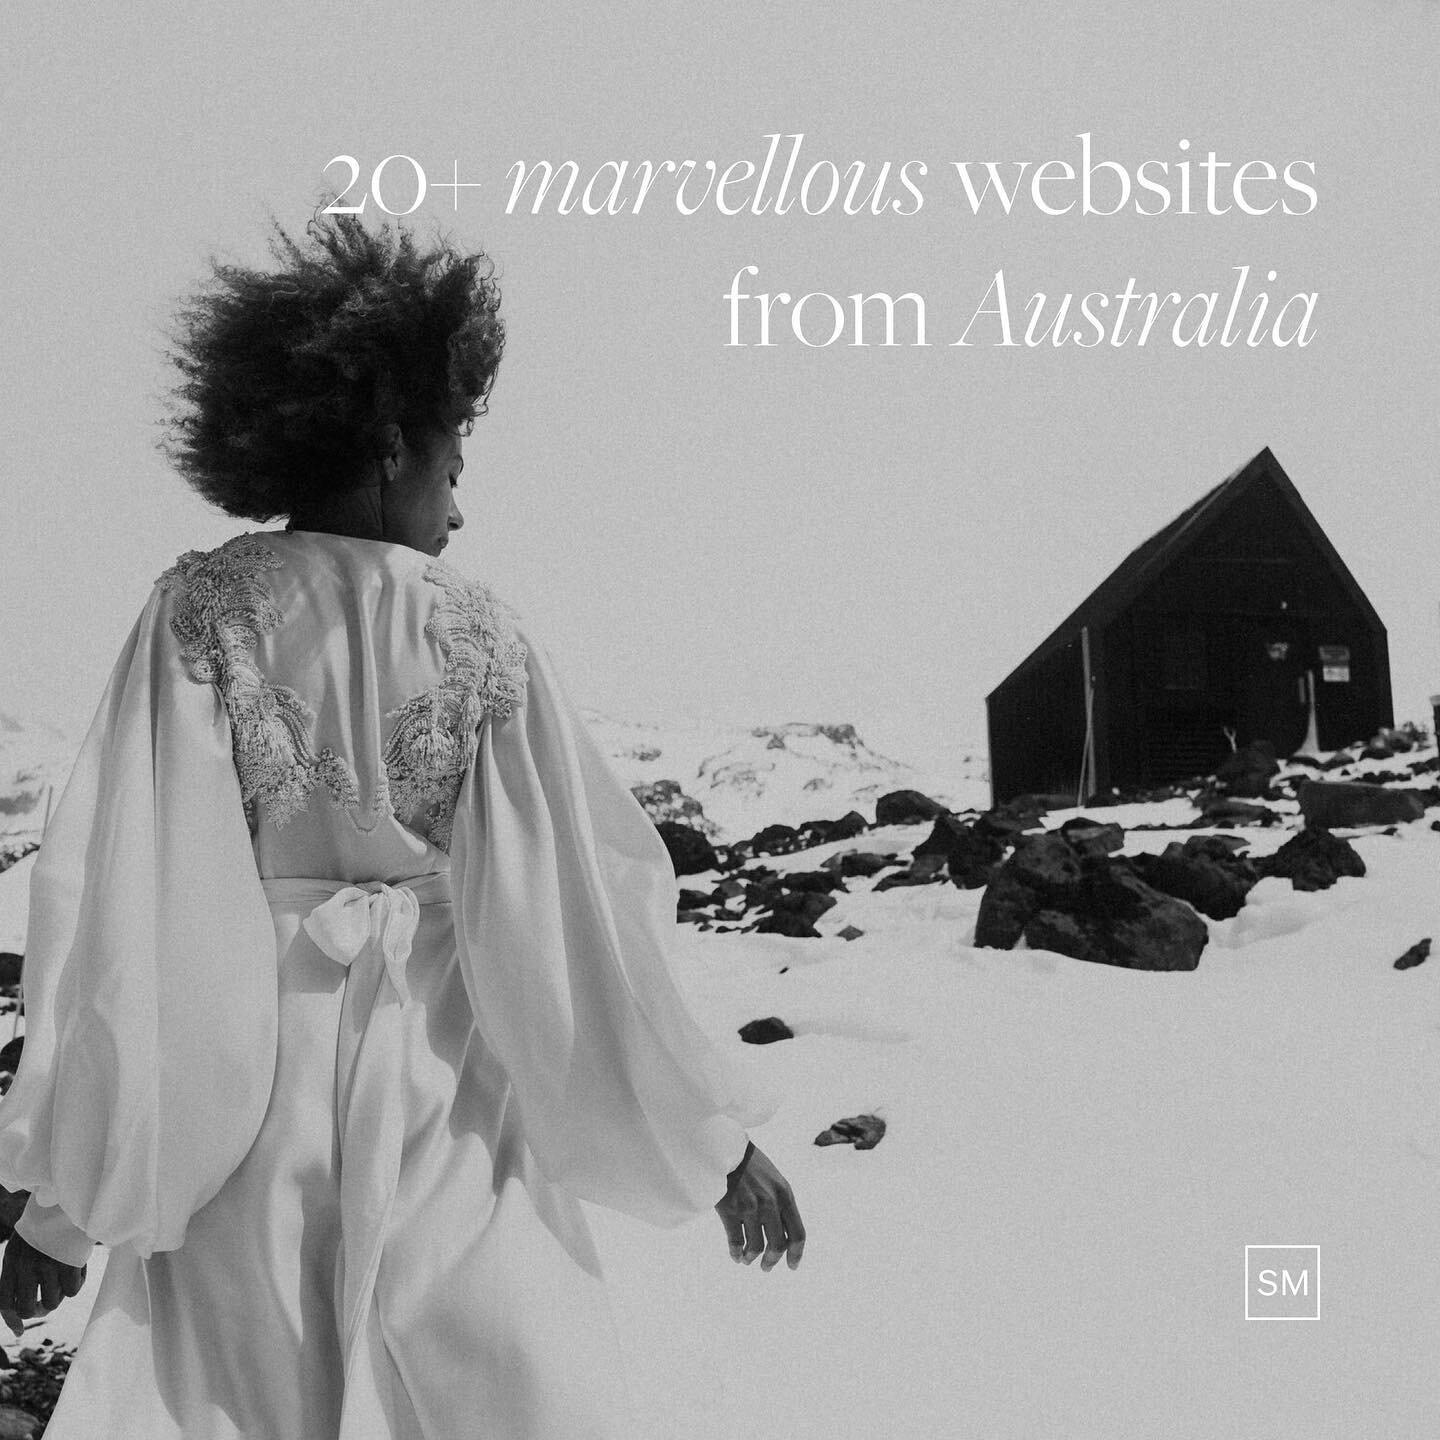 Our Aussie clients rock! 🇦🇺❤️⁣ 

We&rsquo;re forever in awe of your unique vision, your stunning works, your brilliant personalities, and of course - your magnificent websites! ✨ You&rsquo;re a constant source of inspiration for our team and for th